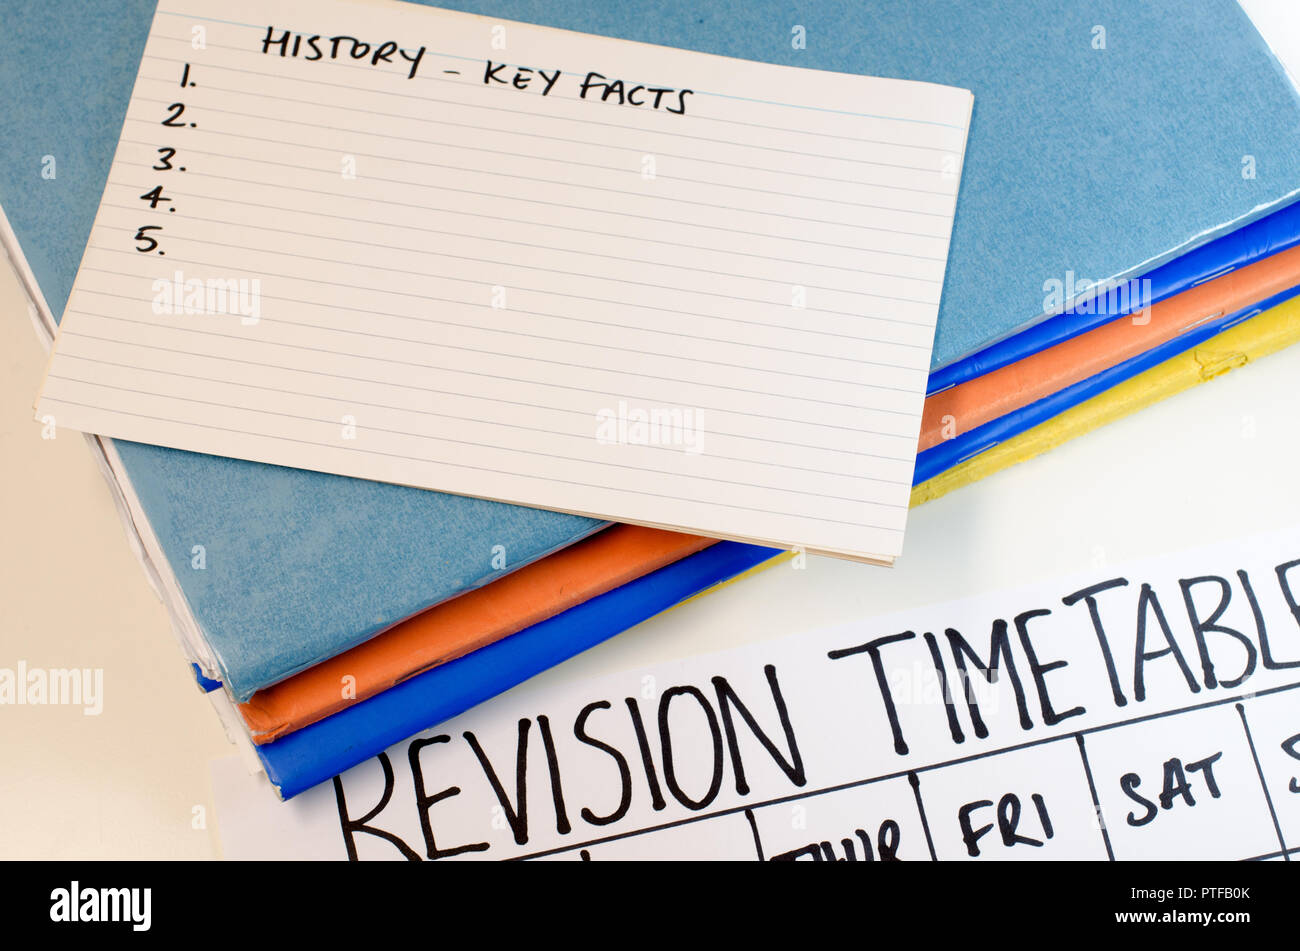 Revision or study timetable concept Stock Photo